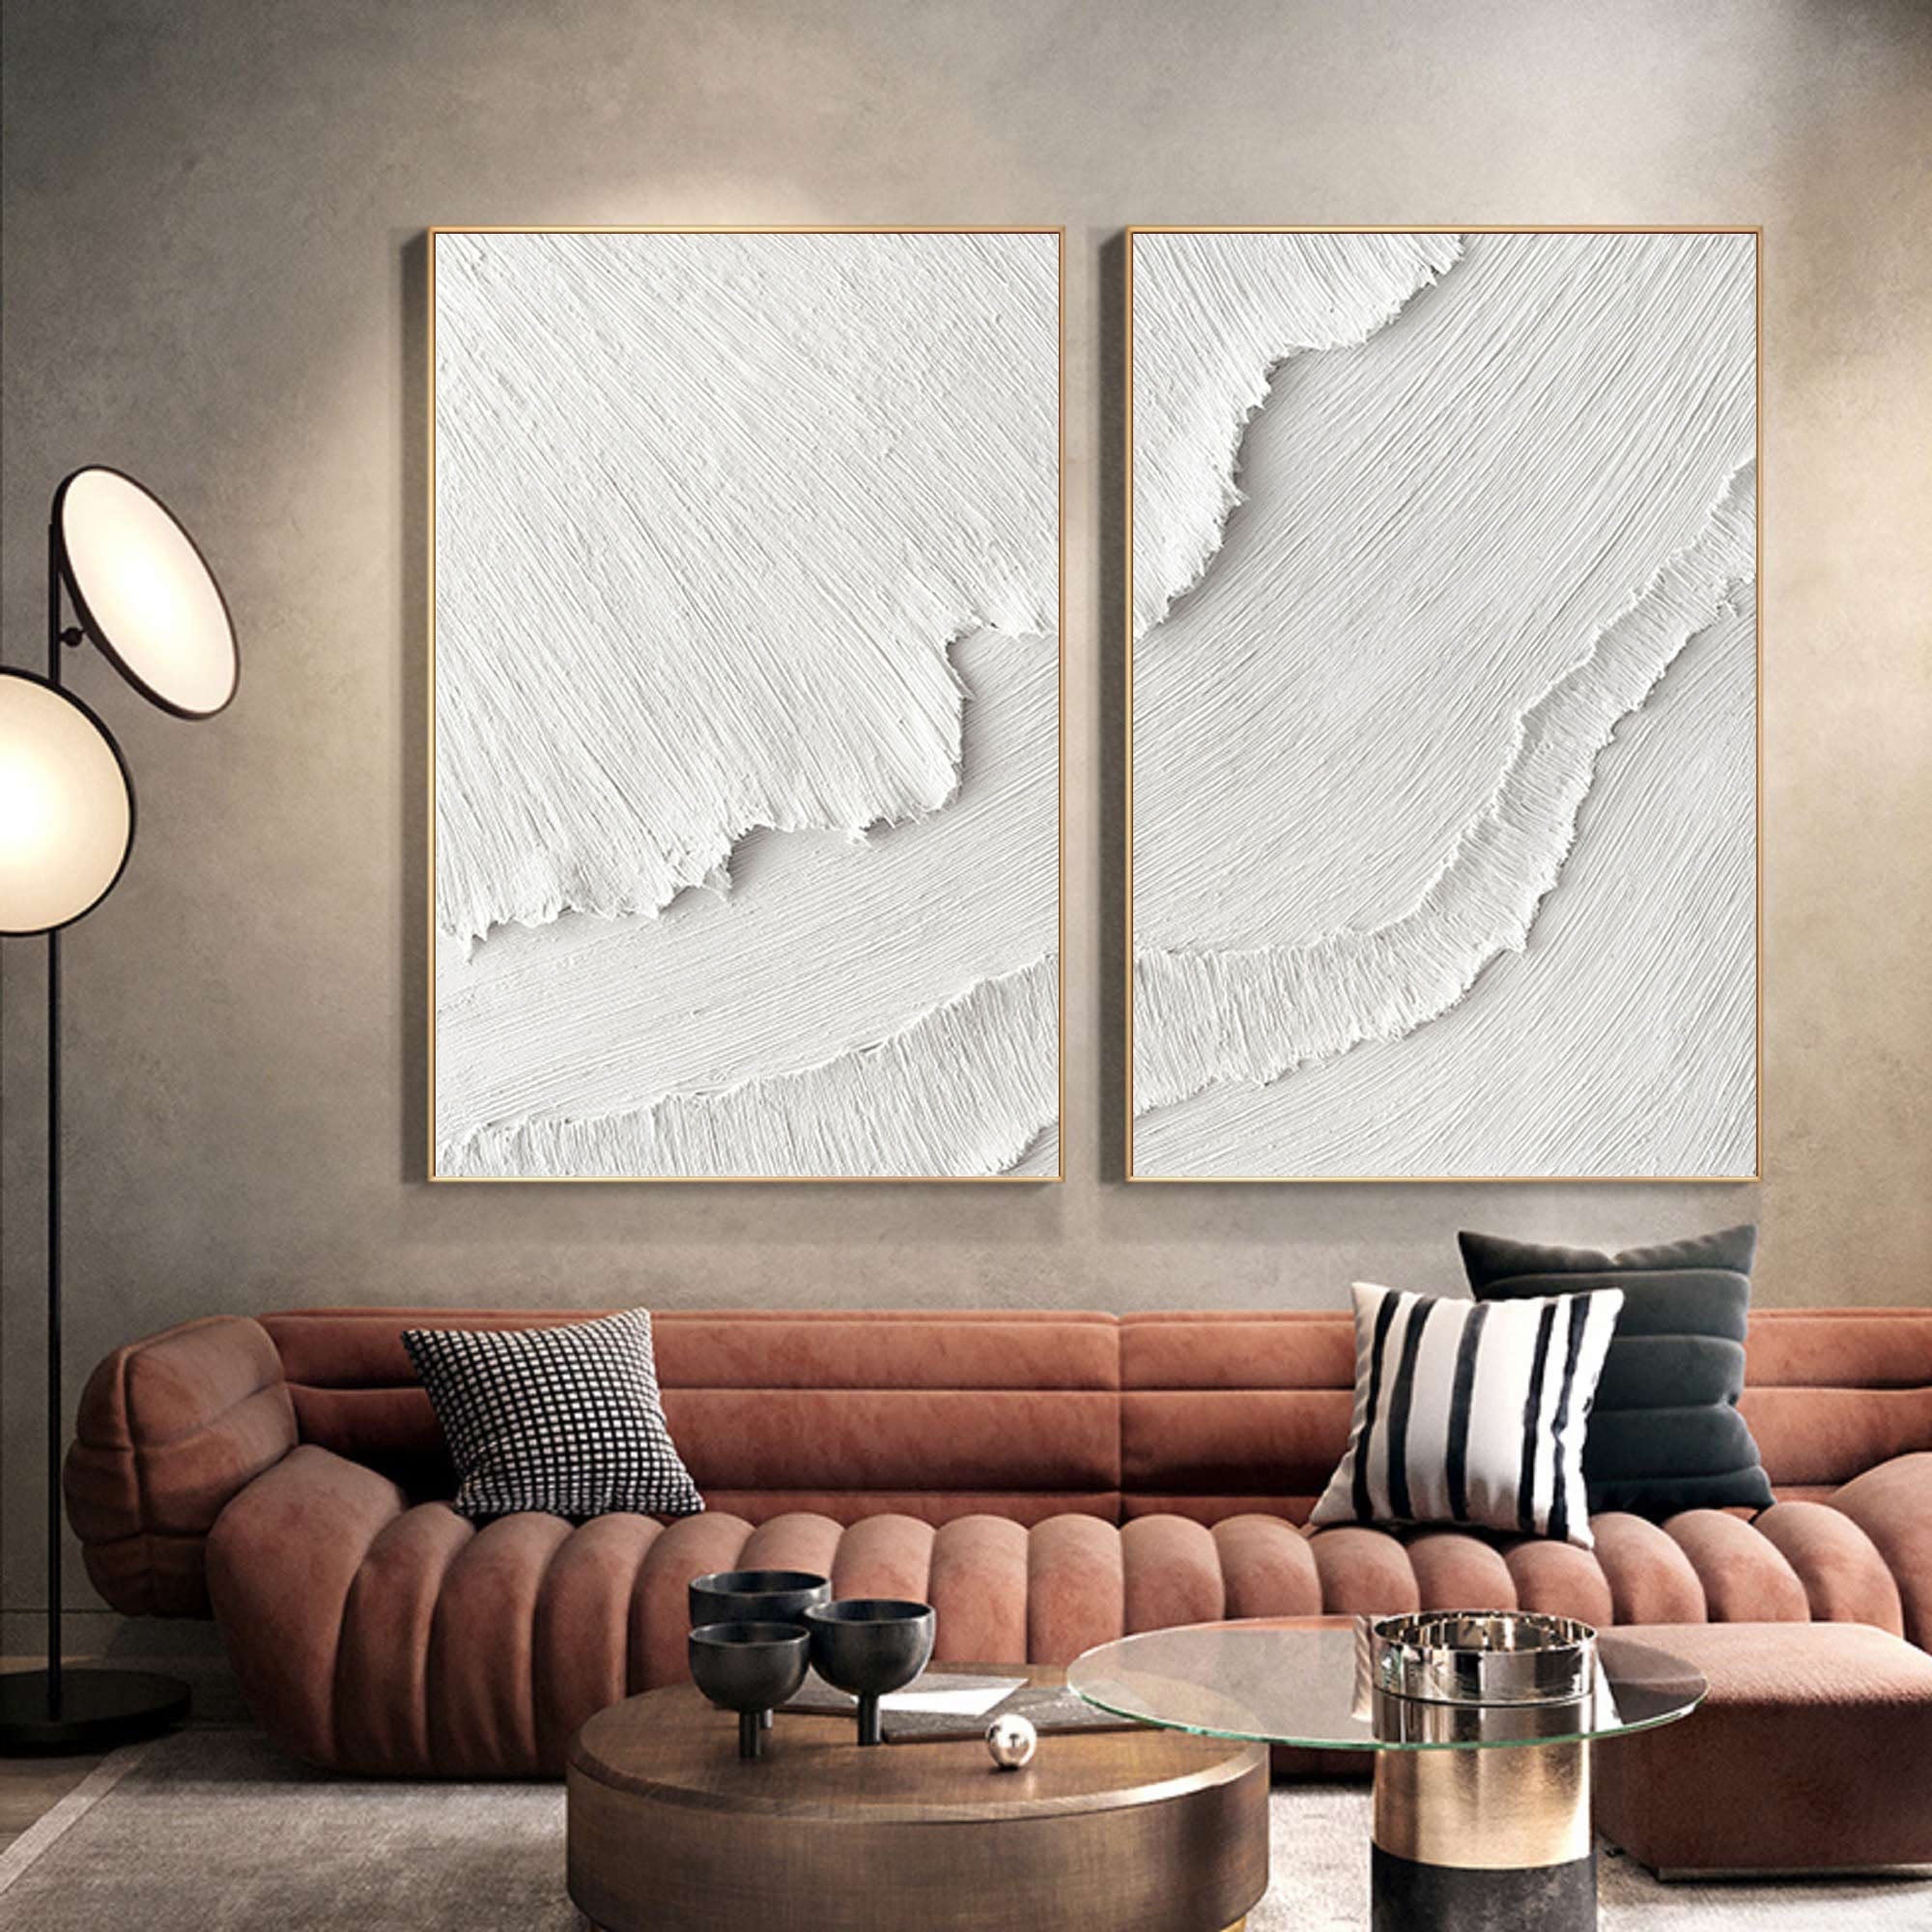 White Plaster 3D Textured Minimalist Abstract Art on Canvas | Handcrafted Monochrome Wall Decor  SET OF 2 #CXA 015